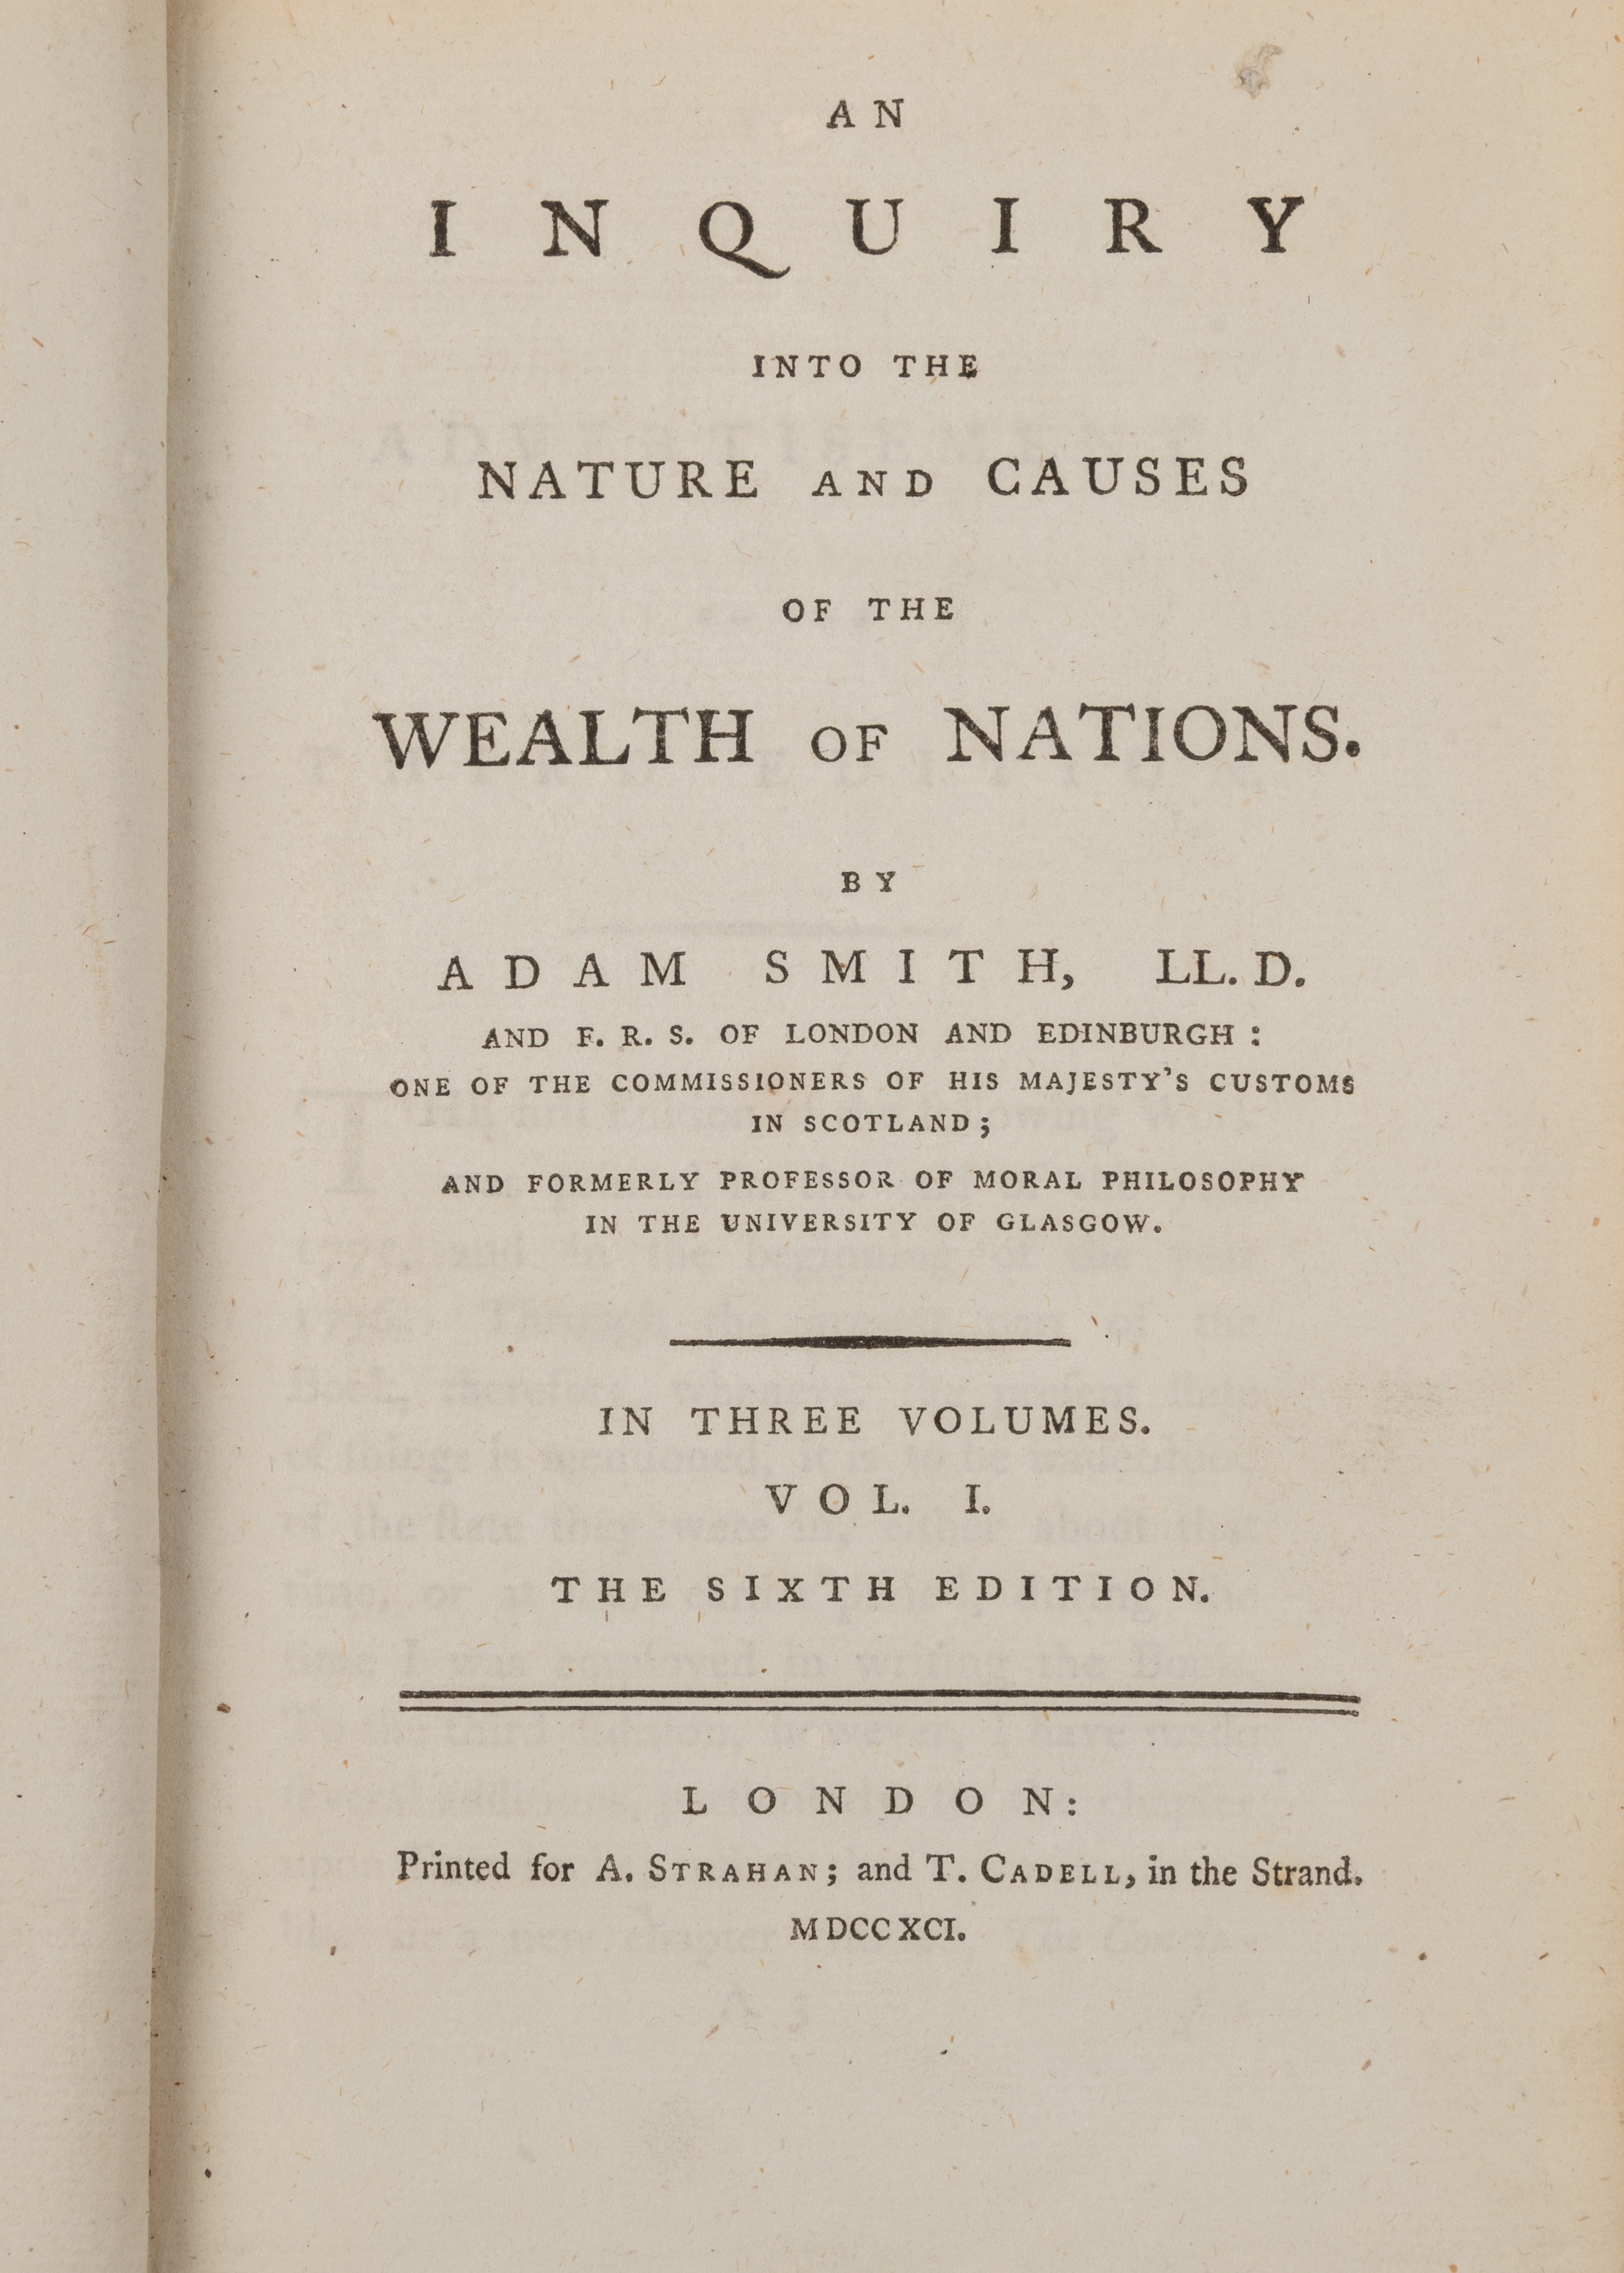 Smith (Adam) 'An Inquiry into the Nature and Causes of the Wealth of Nations' 3 vols. 6th Ed. - Image 3 of 7